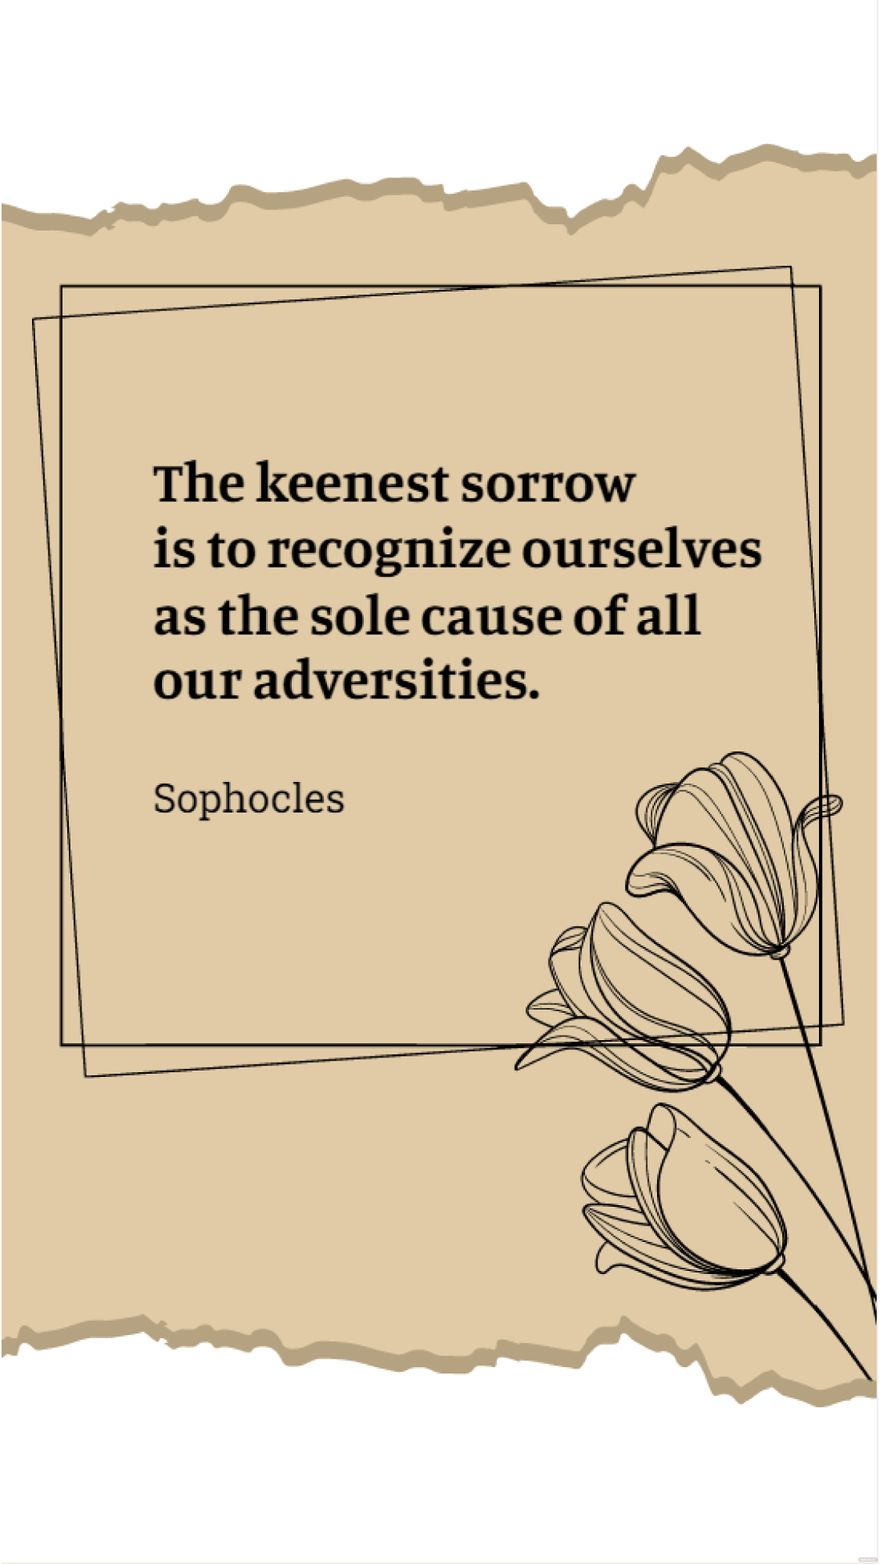 Sophocles - The keenest sorrow is to recognize ourselves as the sole cause of all our adversities.